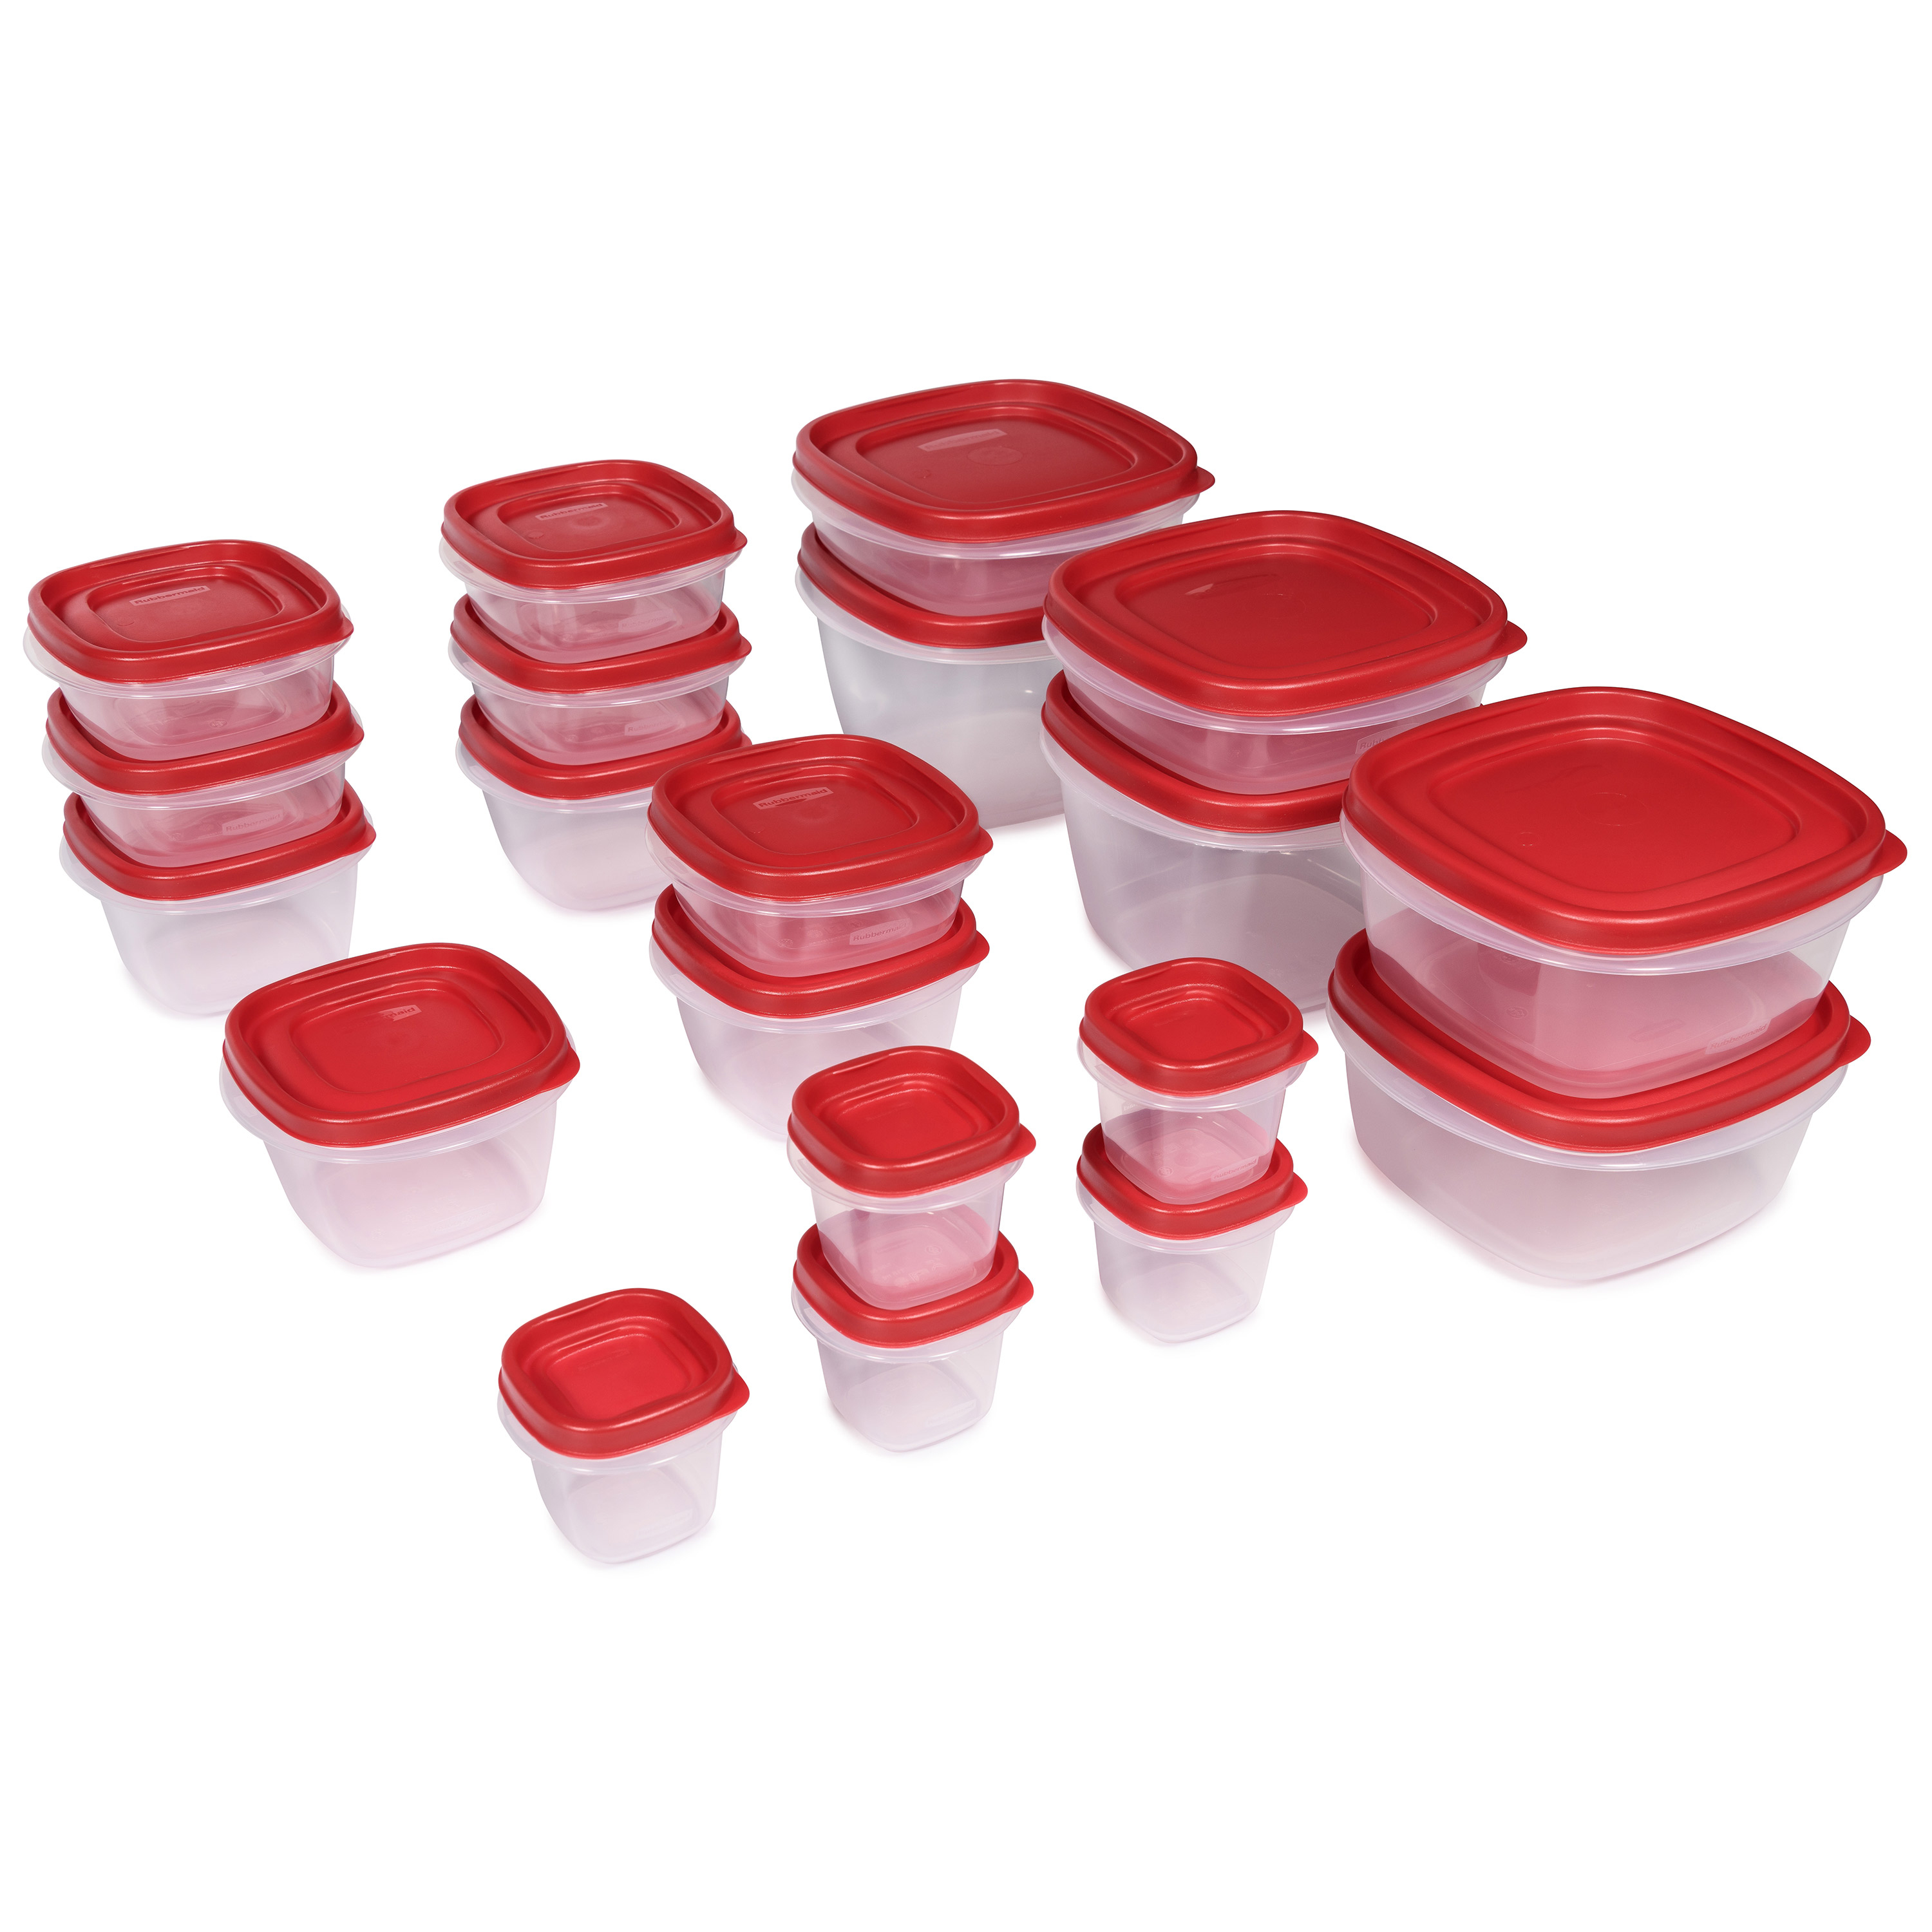 Rubbermaid Easy Find Lids Food Storage and Organization Containers, Set of 20 (40 Pieces Total) - image 1 of 13